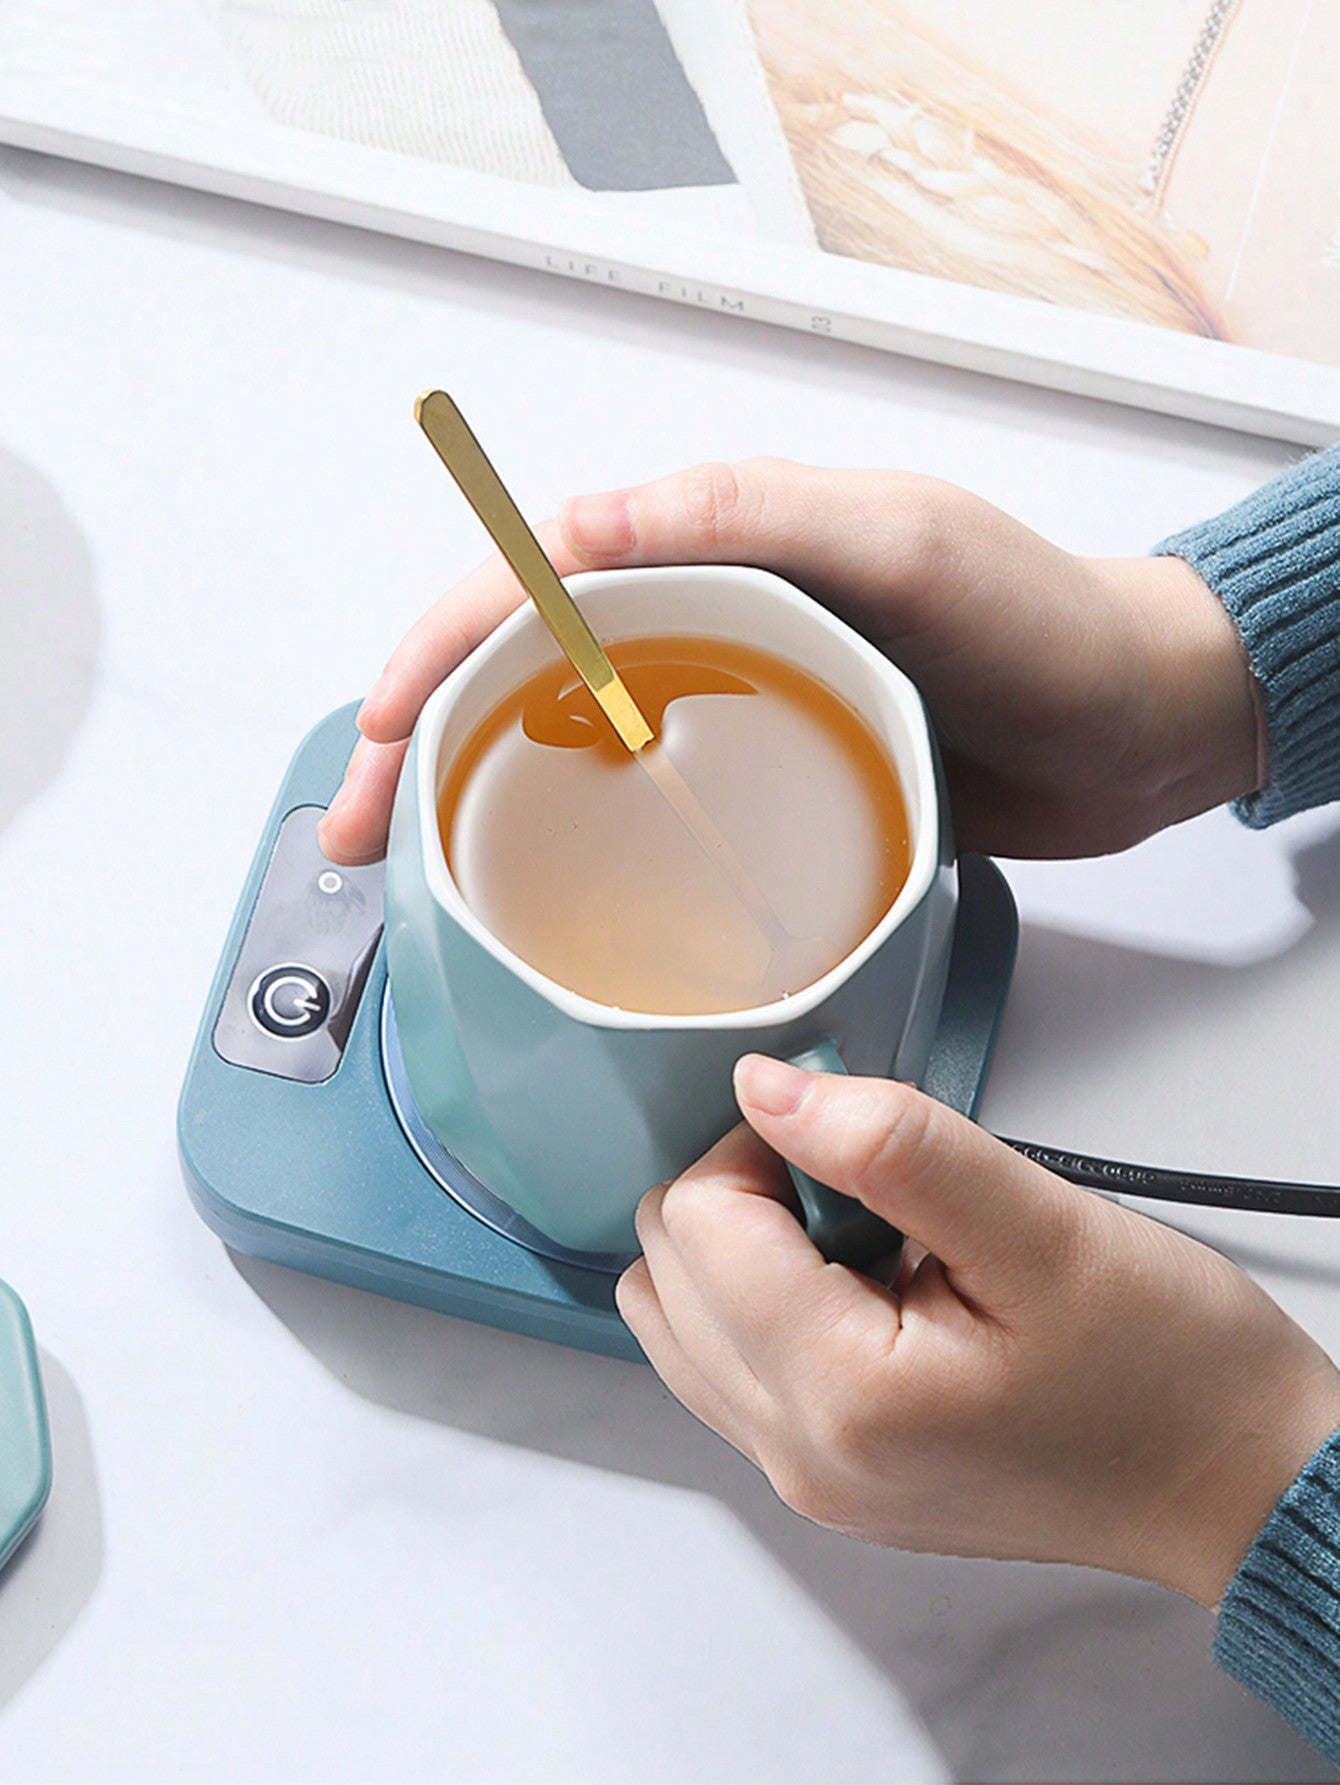 Portable Usb Cup Warmer, 3-level Coffee Cup Warmer Pad, Intelligent  Thermostatic Milk Tea Hot Water Pad Heater